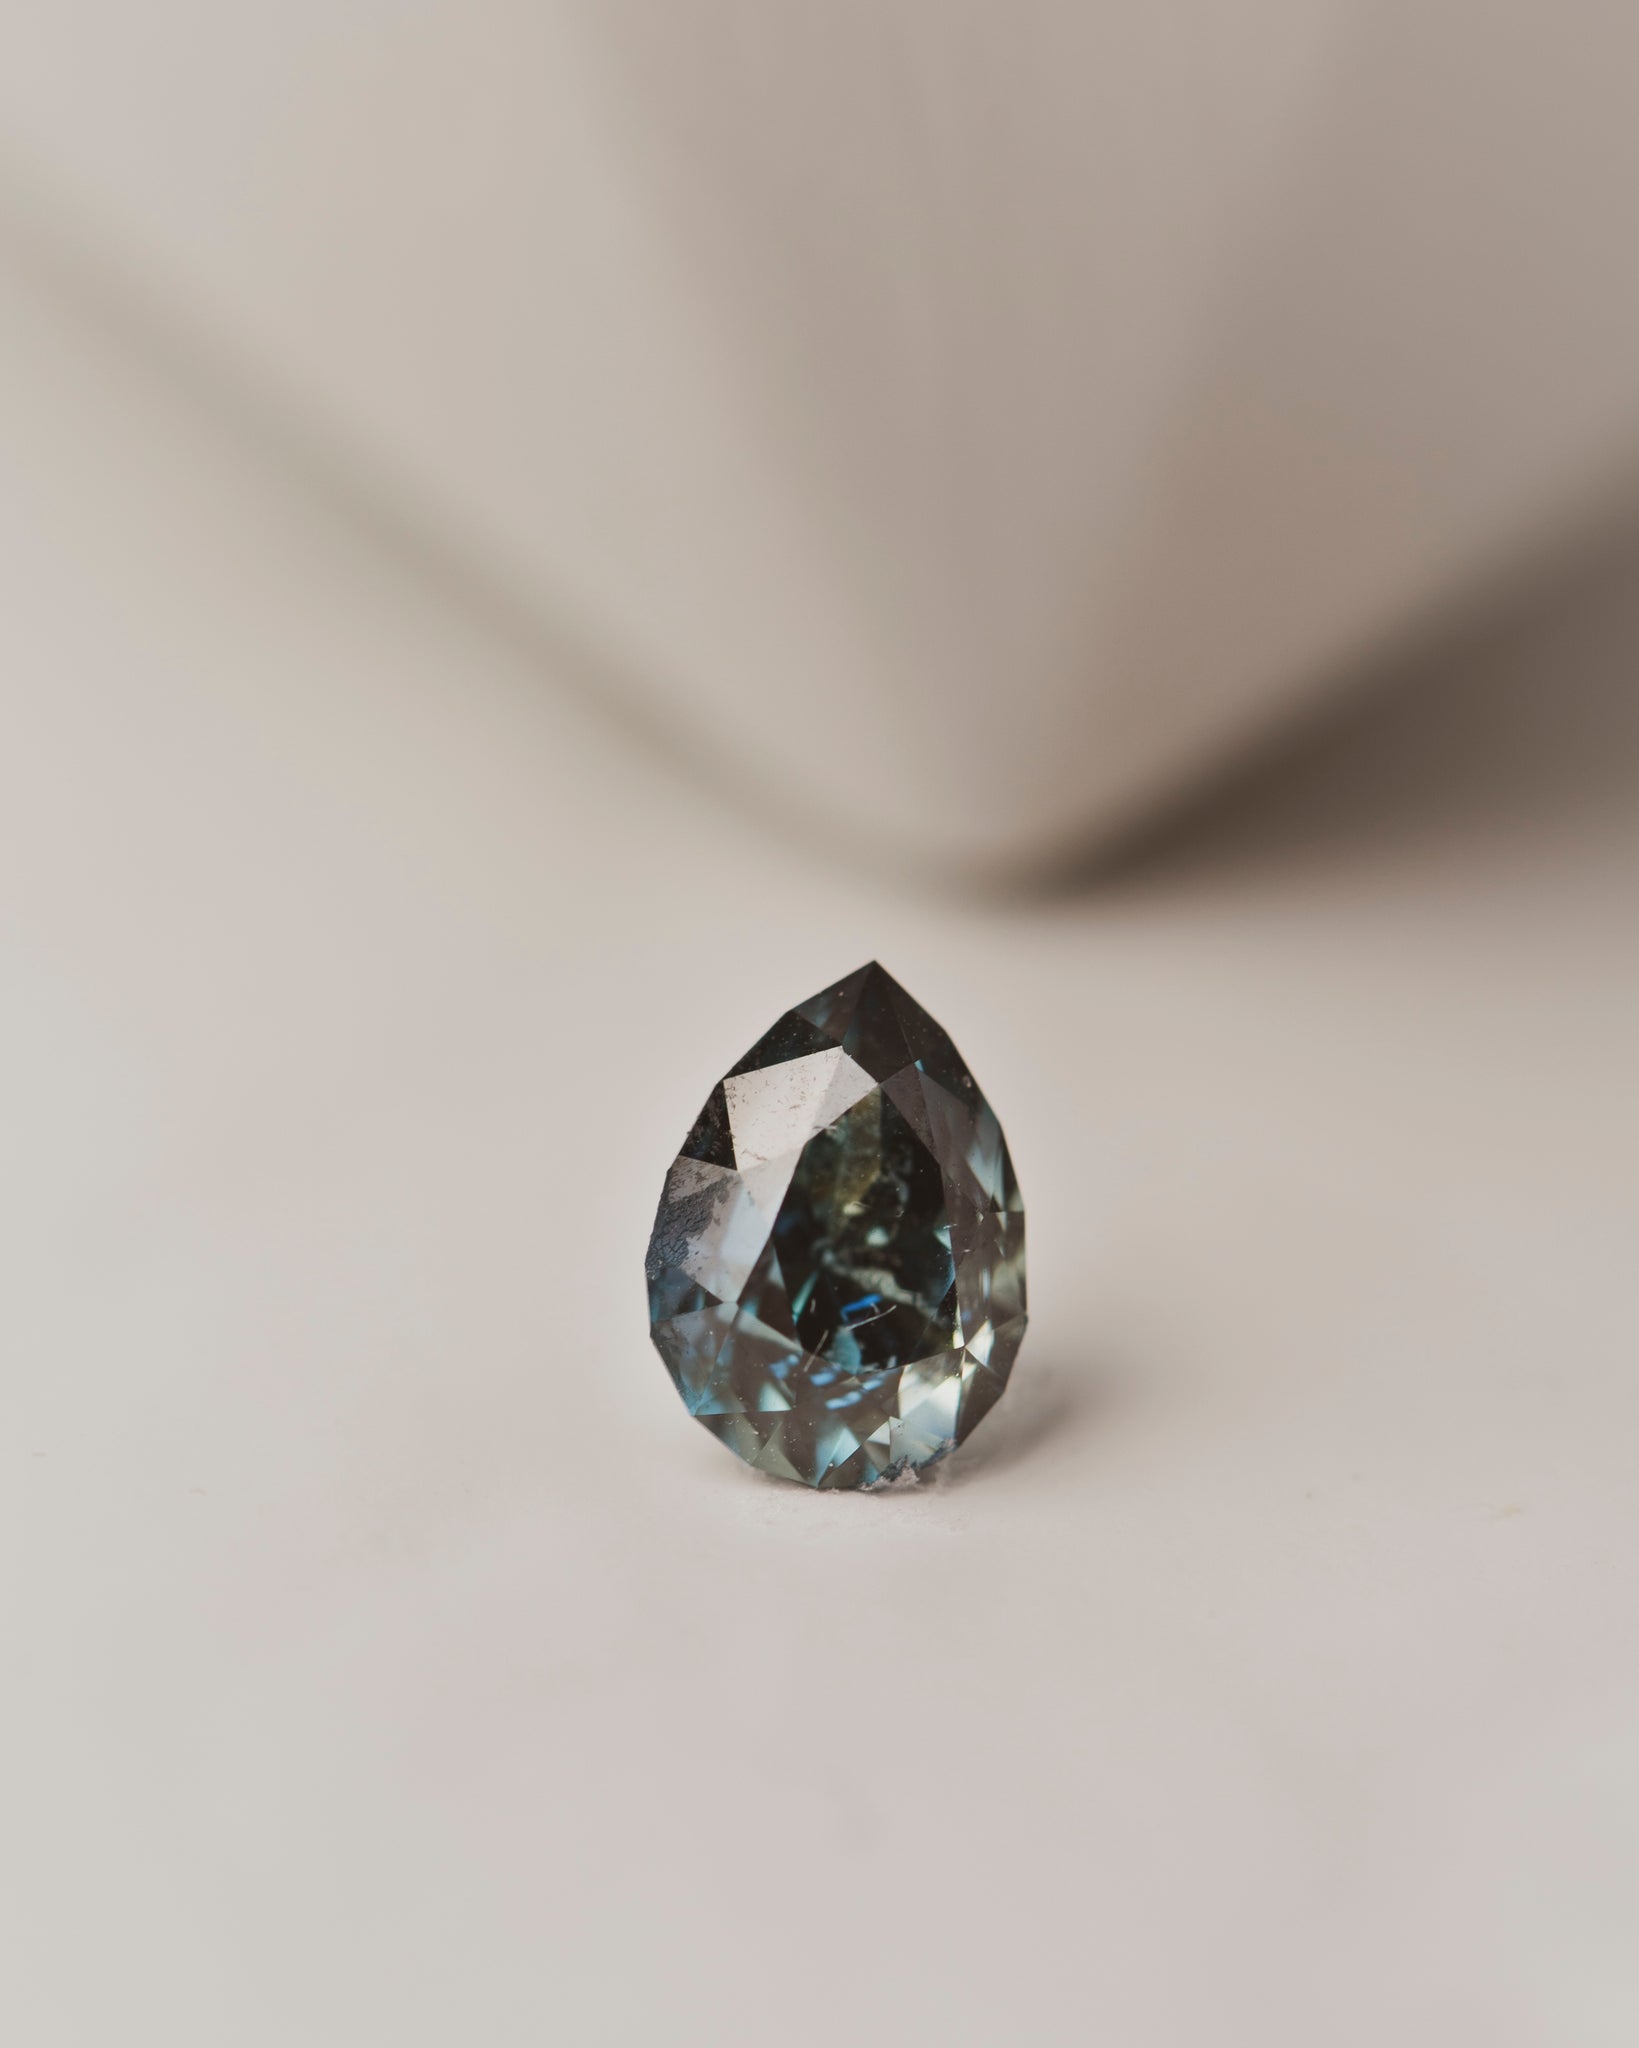 This 1.4 carat blue-green sapphire is pear cut and was responsibly mined in Nigeria, perfect for a custom engagement ring